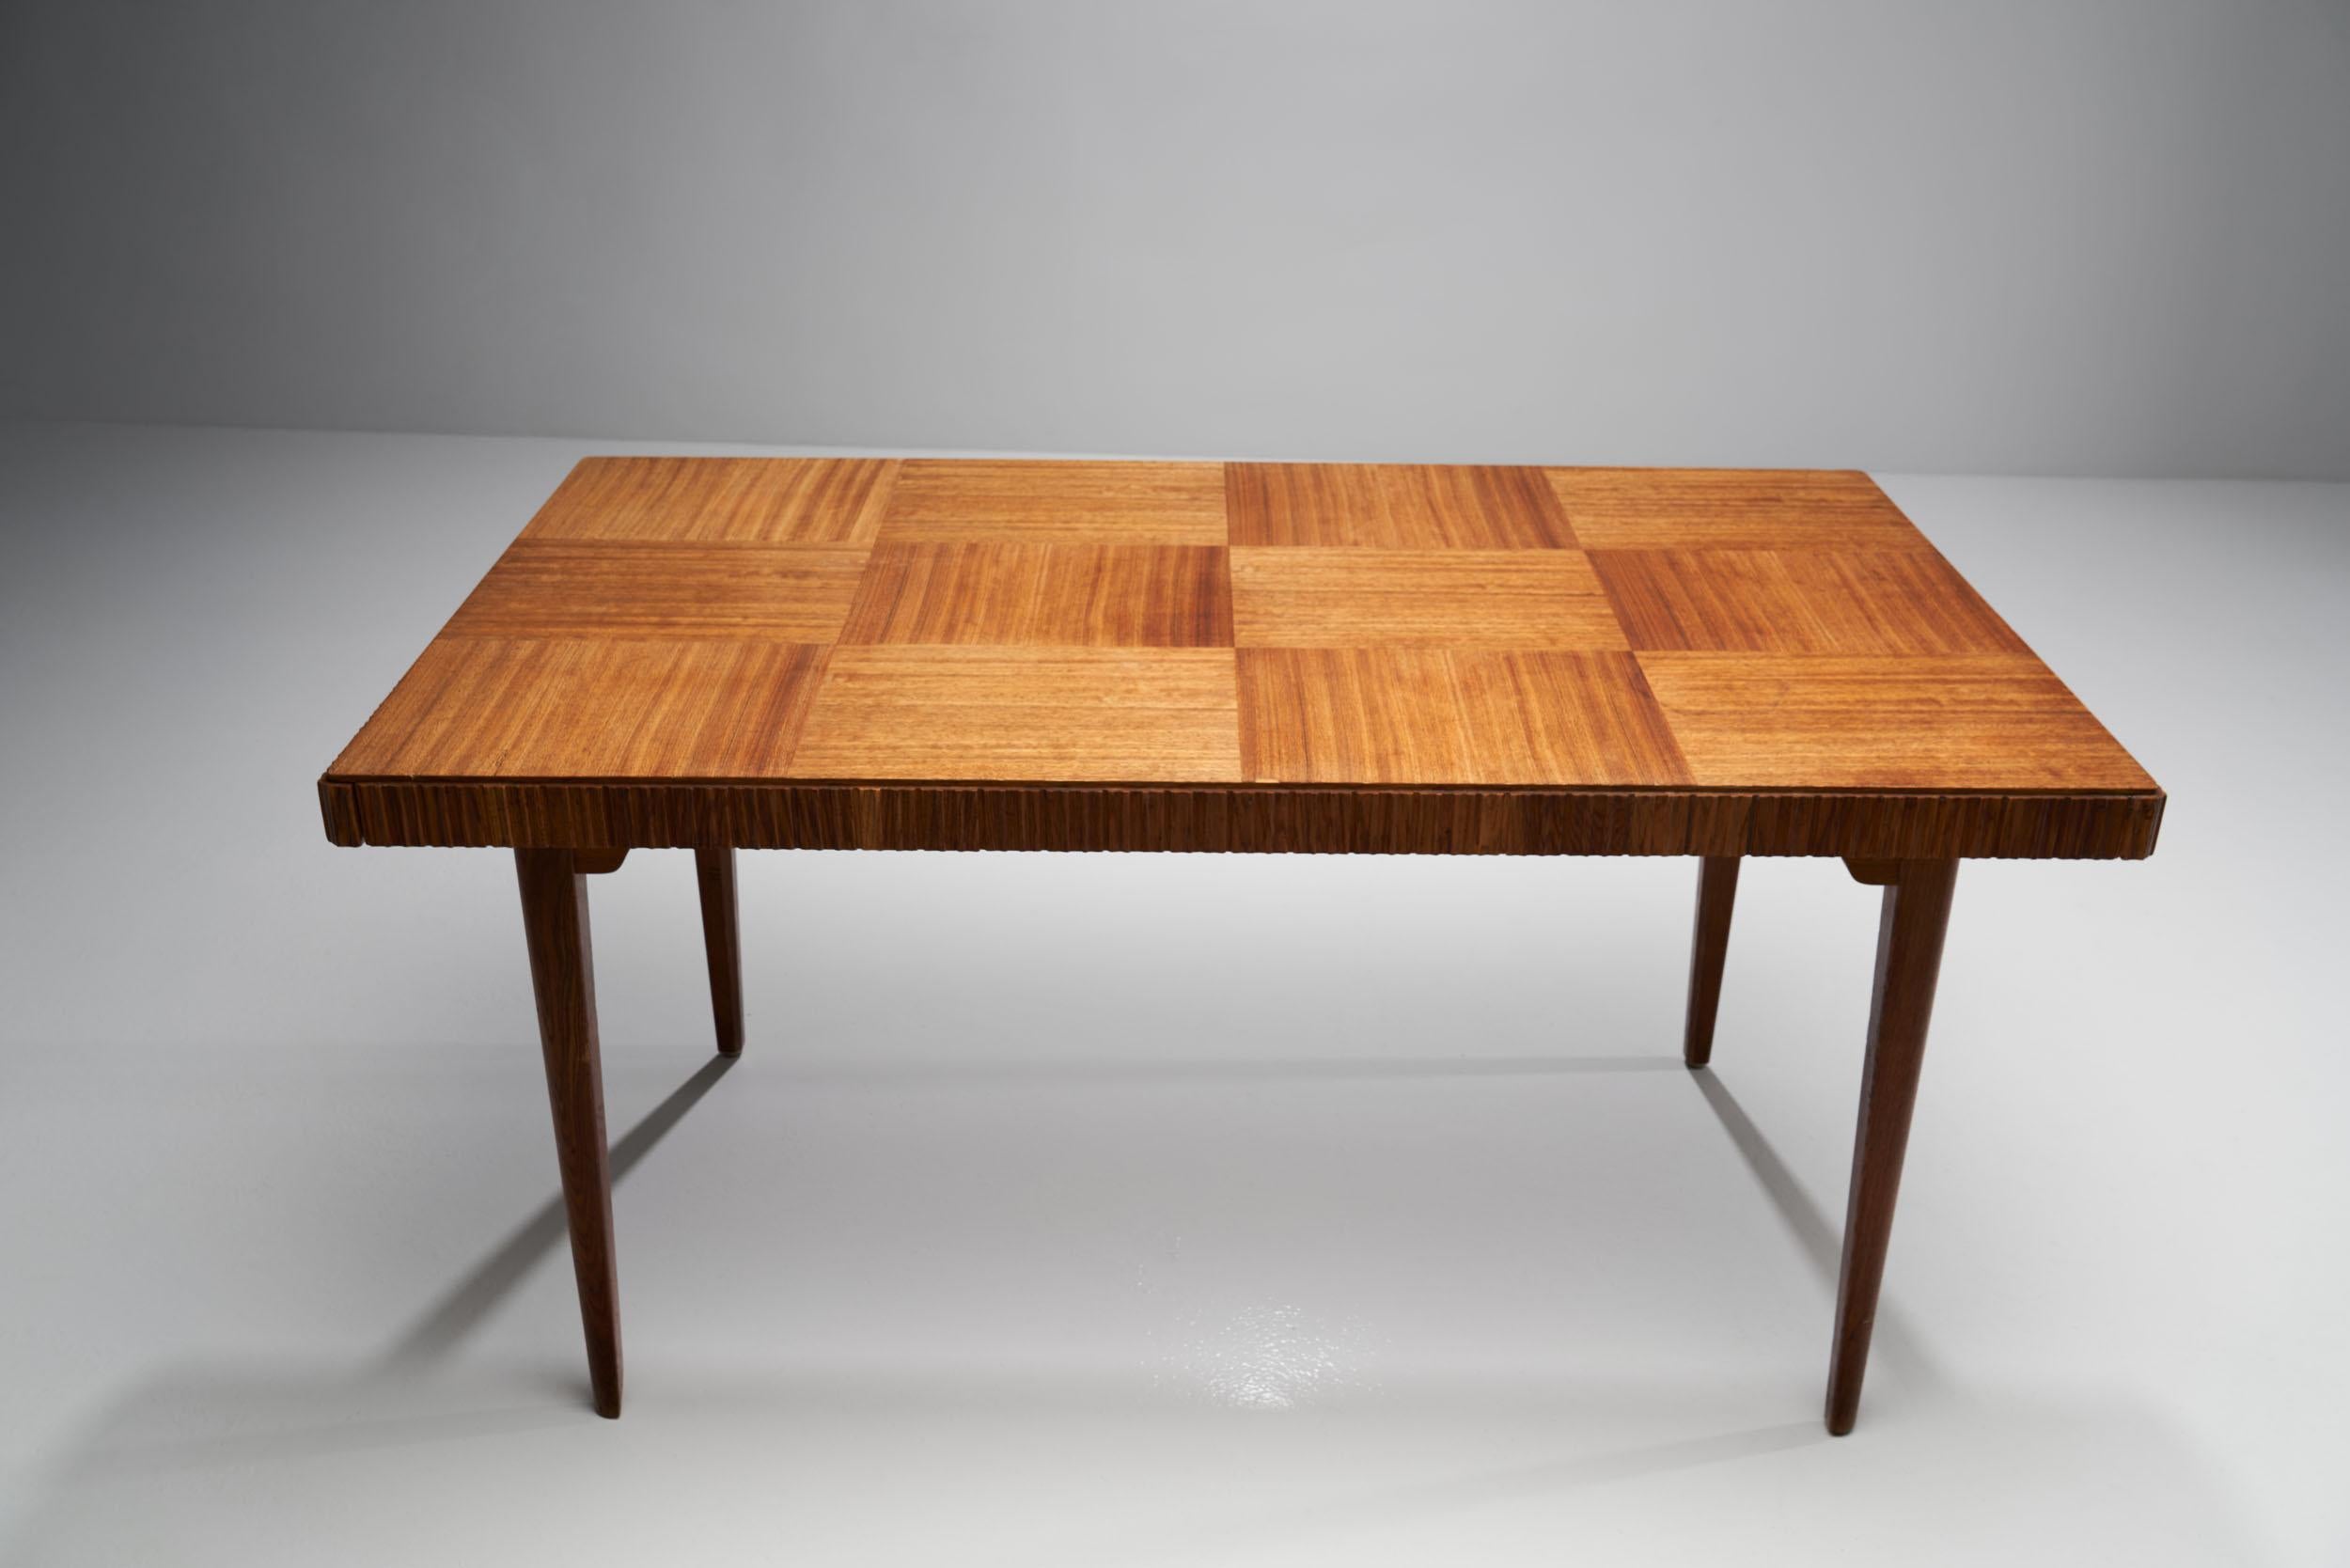 20th Century Wood Dining Table by Carl Axel Acking for Bodafors, ca 1940s-1950s For Sale